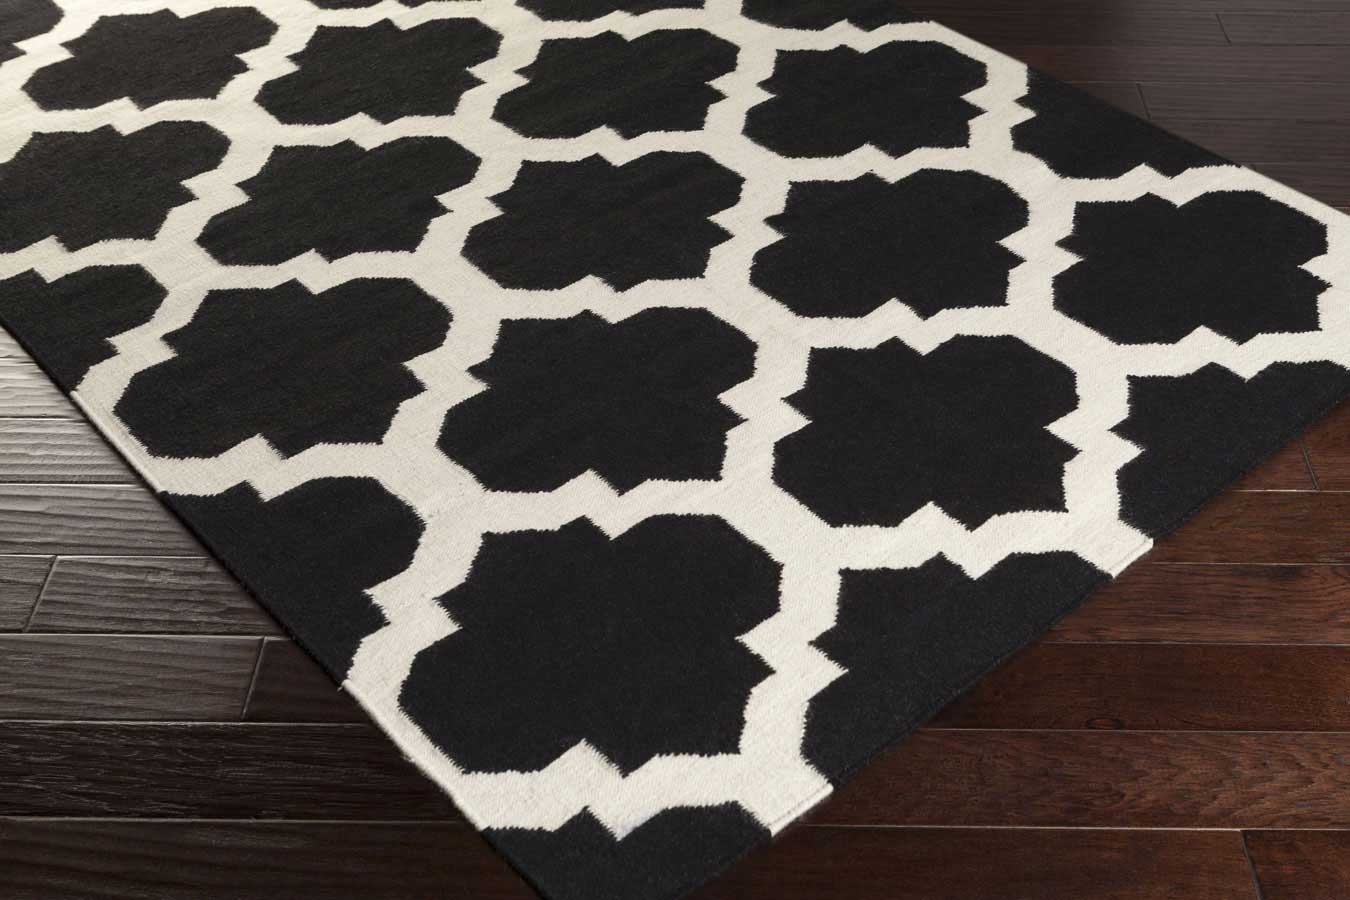 Black and white area rugs artistic weavers york harlow awhd1028 black/white area rug JGHYSDA